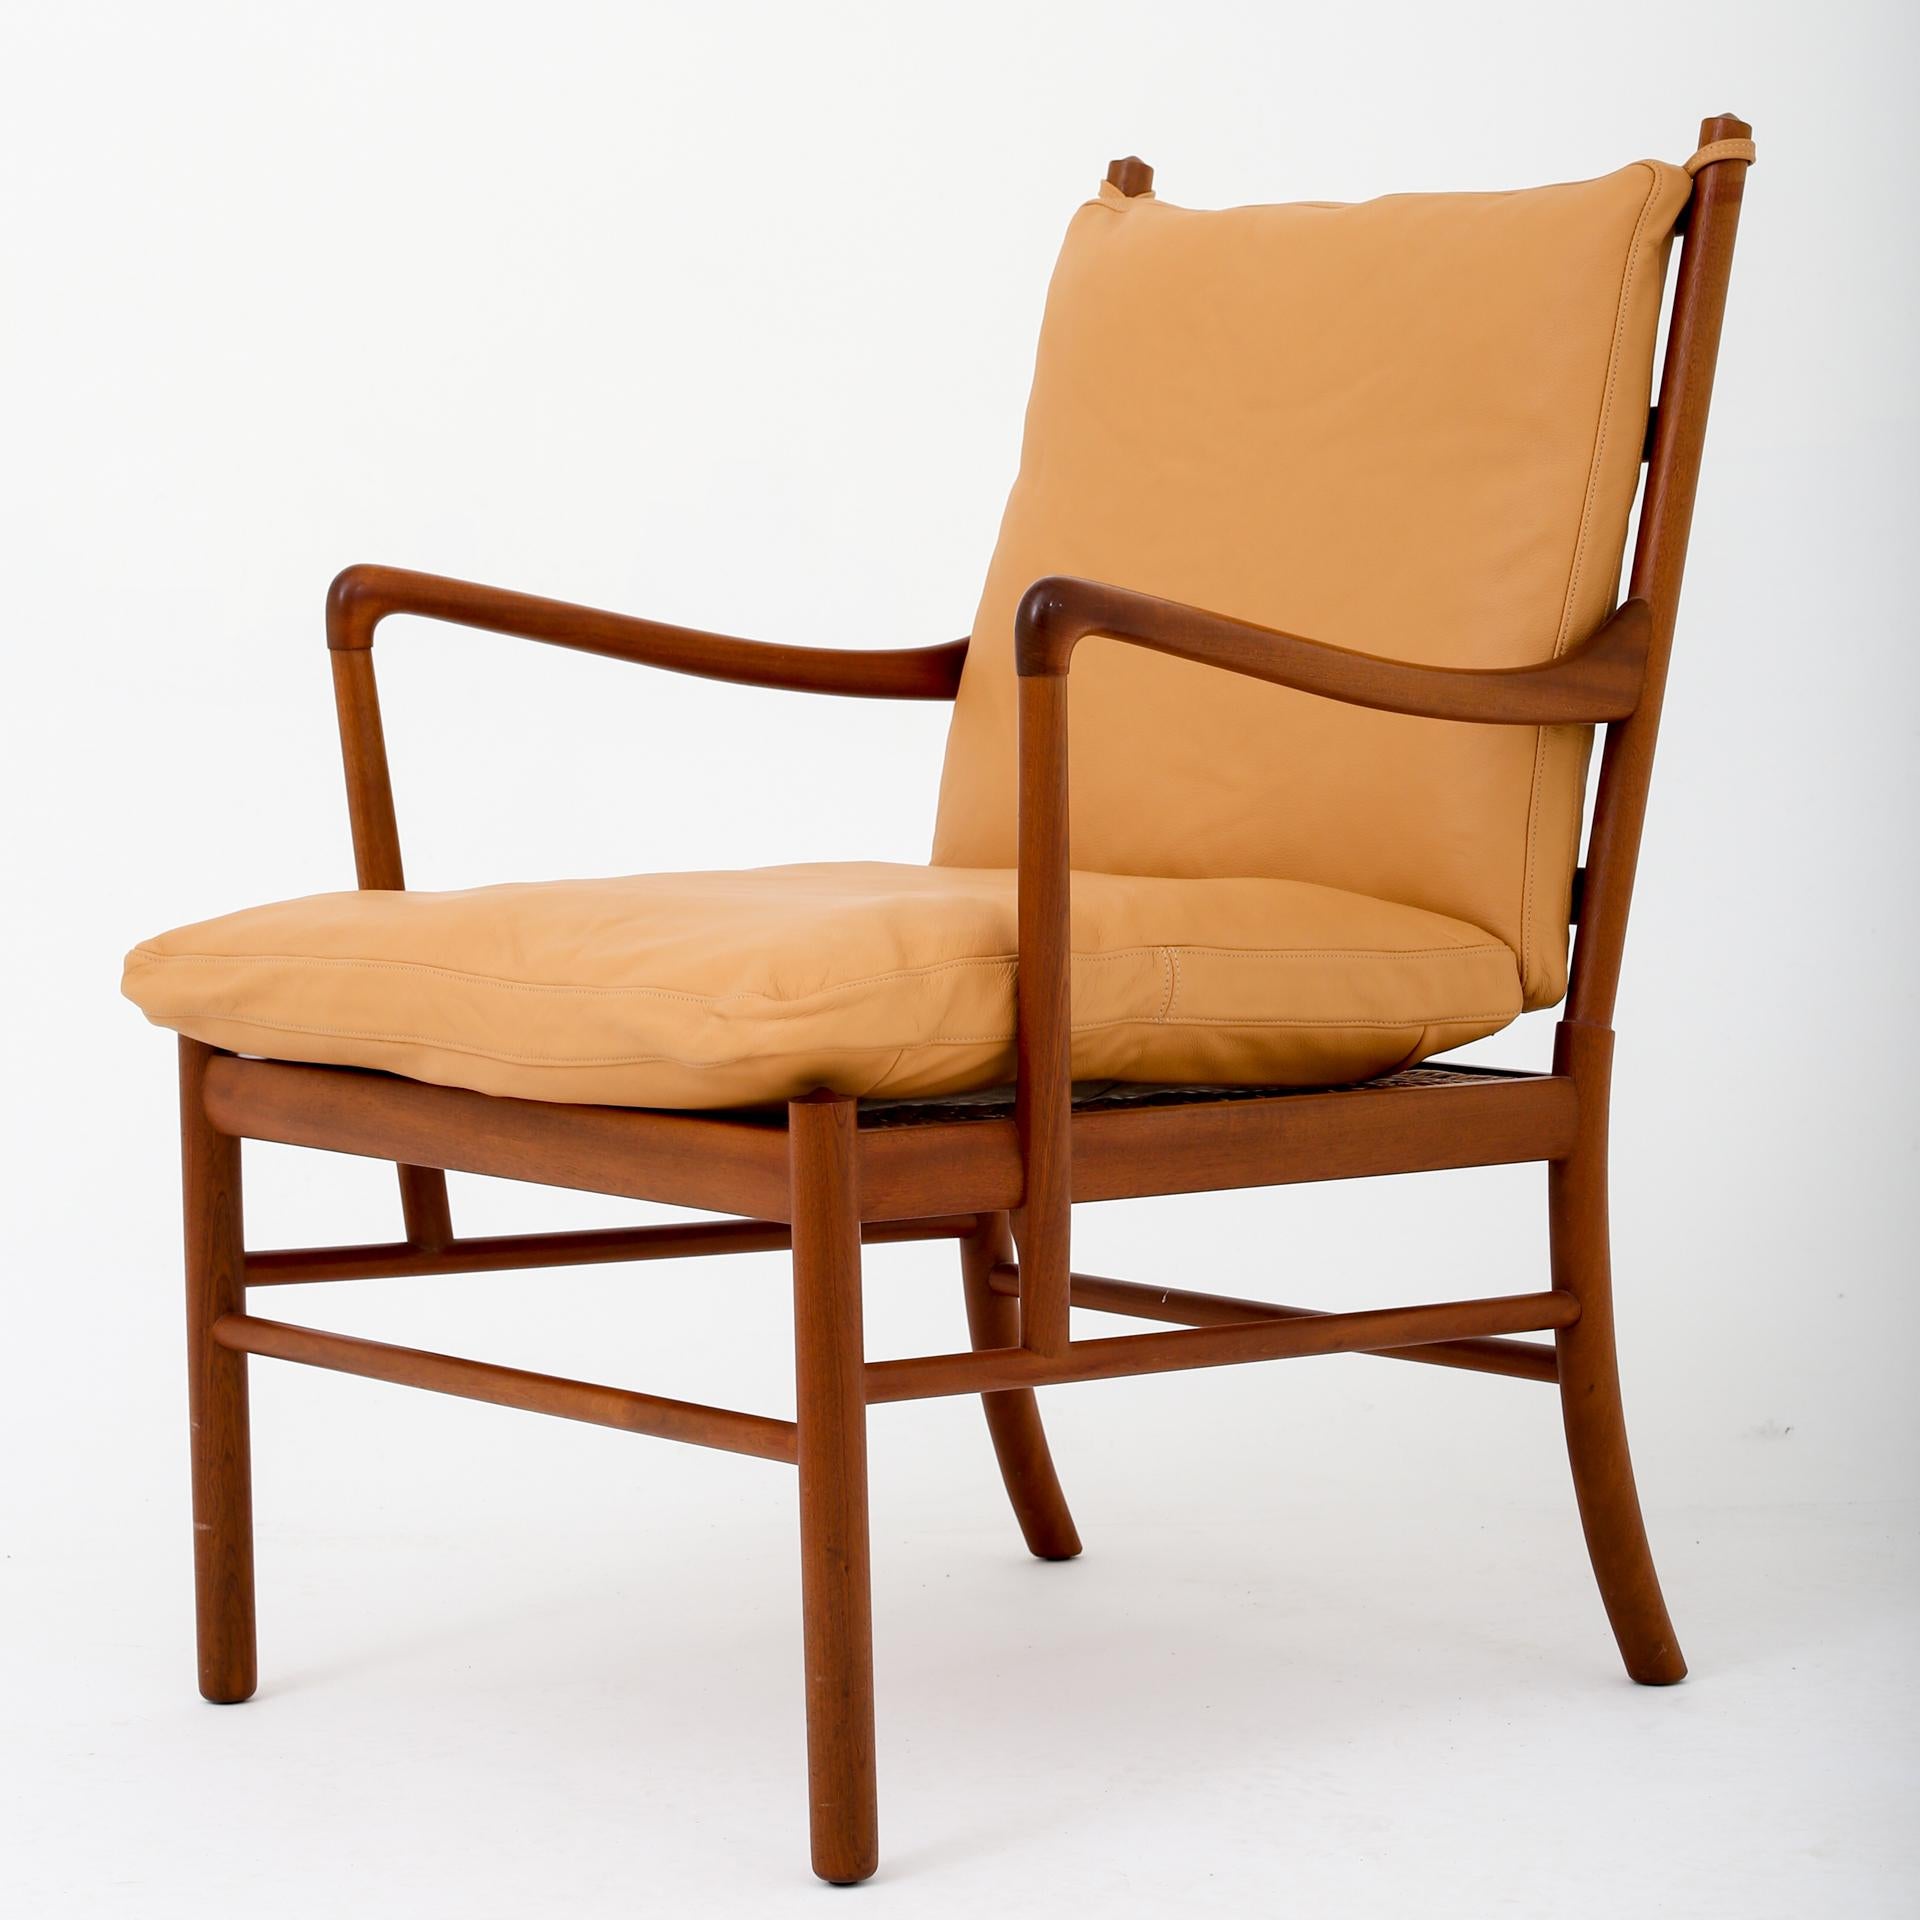 Ole Wanscher / P. Jeppesen. Set of 2 PJ 149 - 'Colonial Chairs' in light mahogany with cushions in cognac leather.